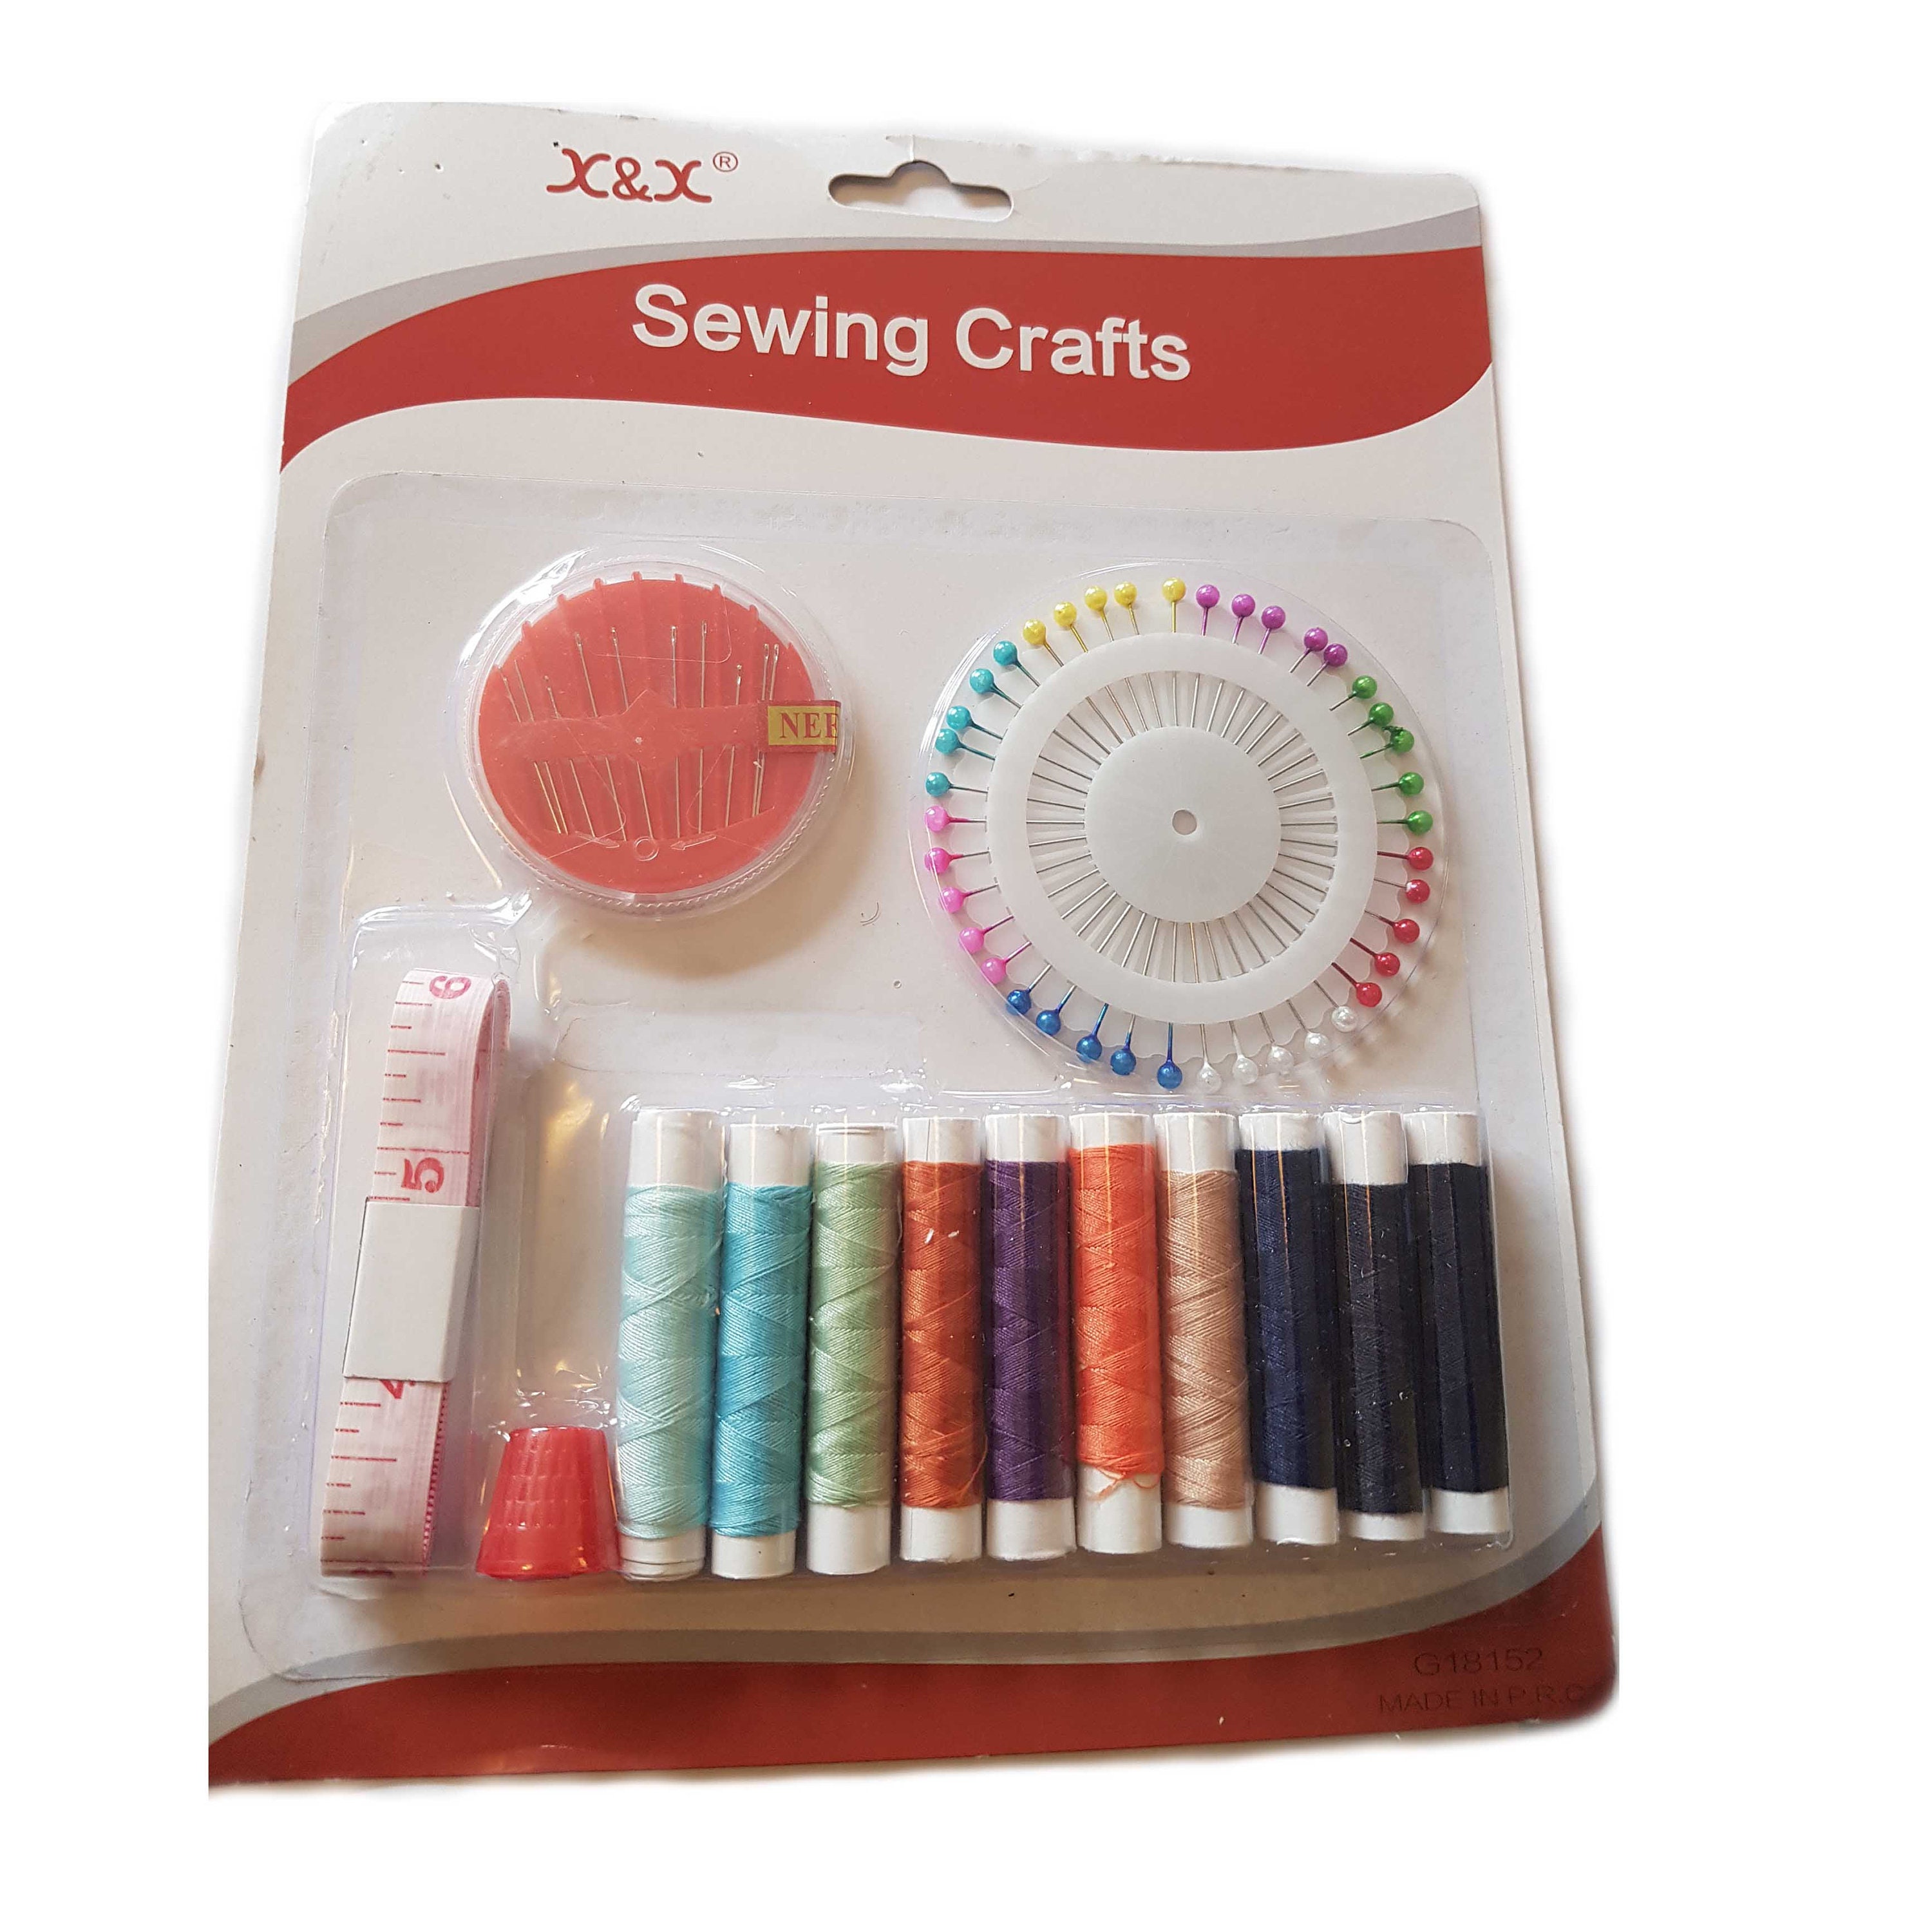 MINI SEWING KIT, Sewing Kits Travel Size, Emergency Sewing Kit, Sewers  Starter Gift, Sewing Kits Tool for Travel Use, Gift for Her 